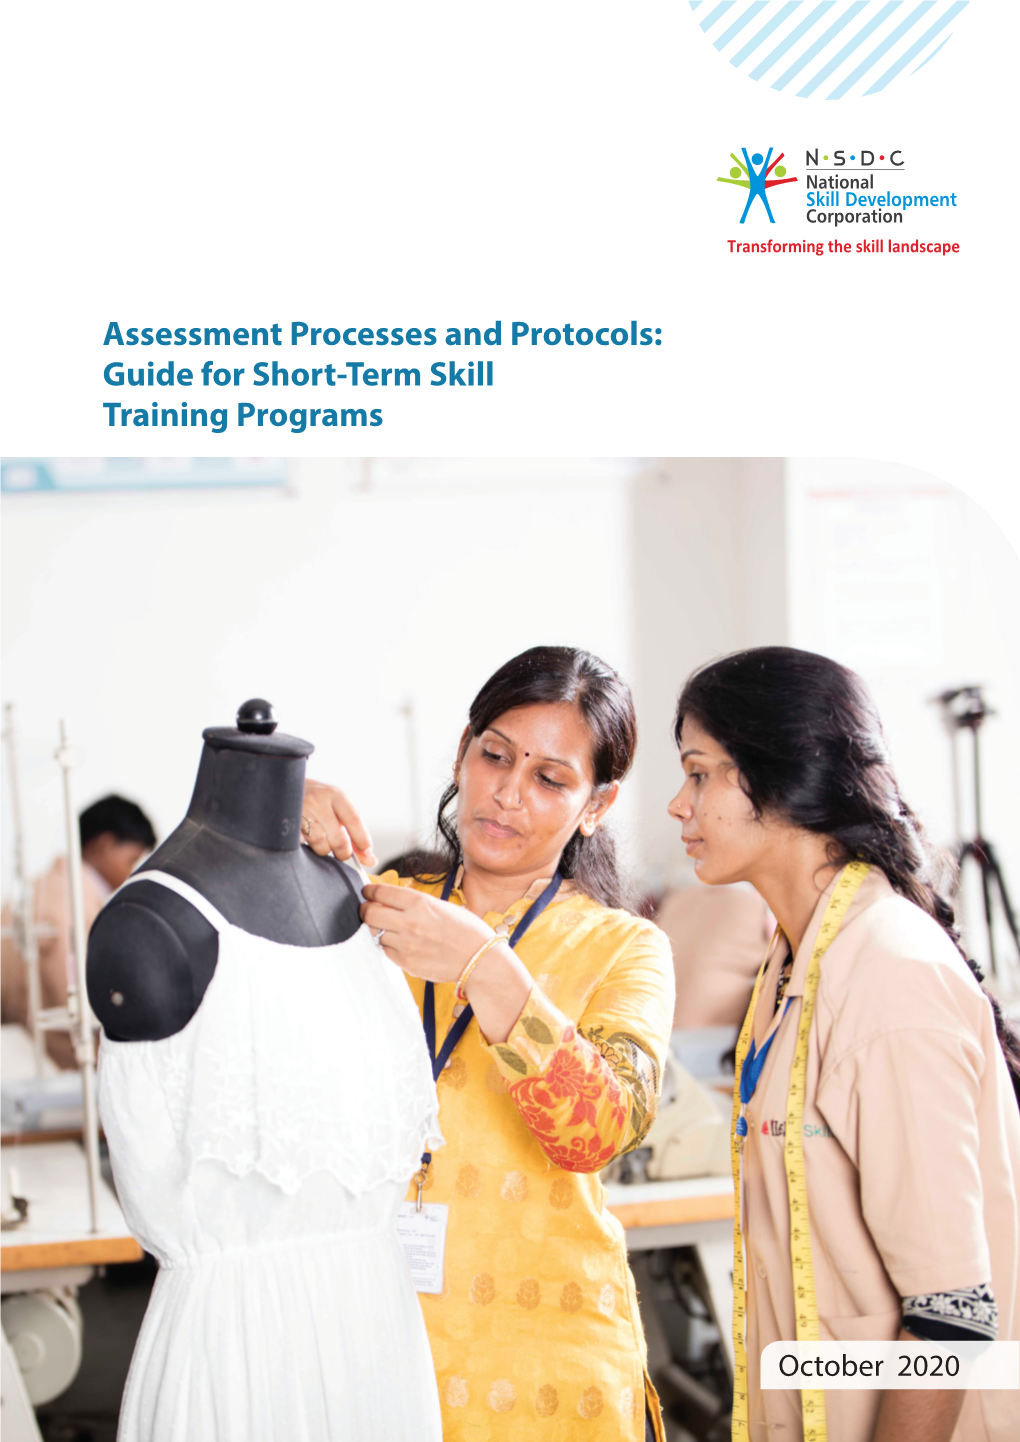 Assessment Processes and Protocols: Guide for Short-Term Skill Training Programs